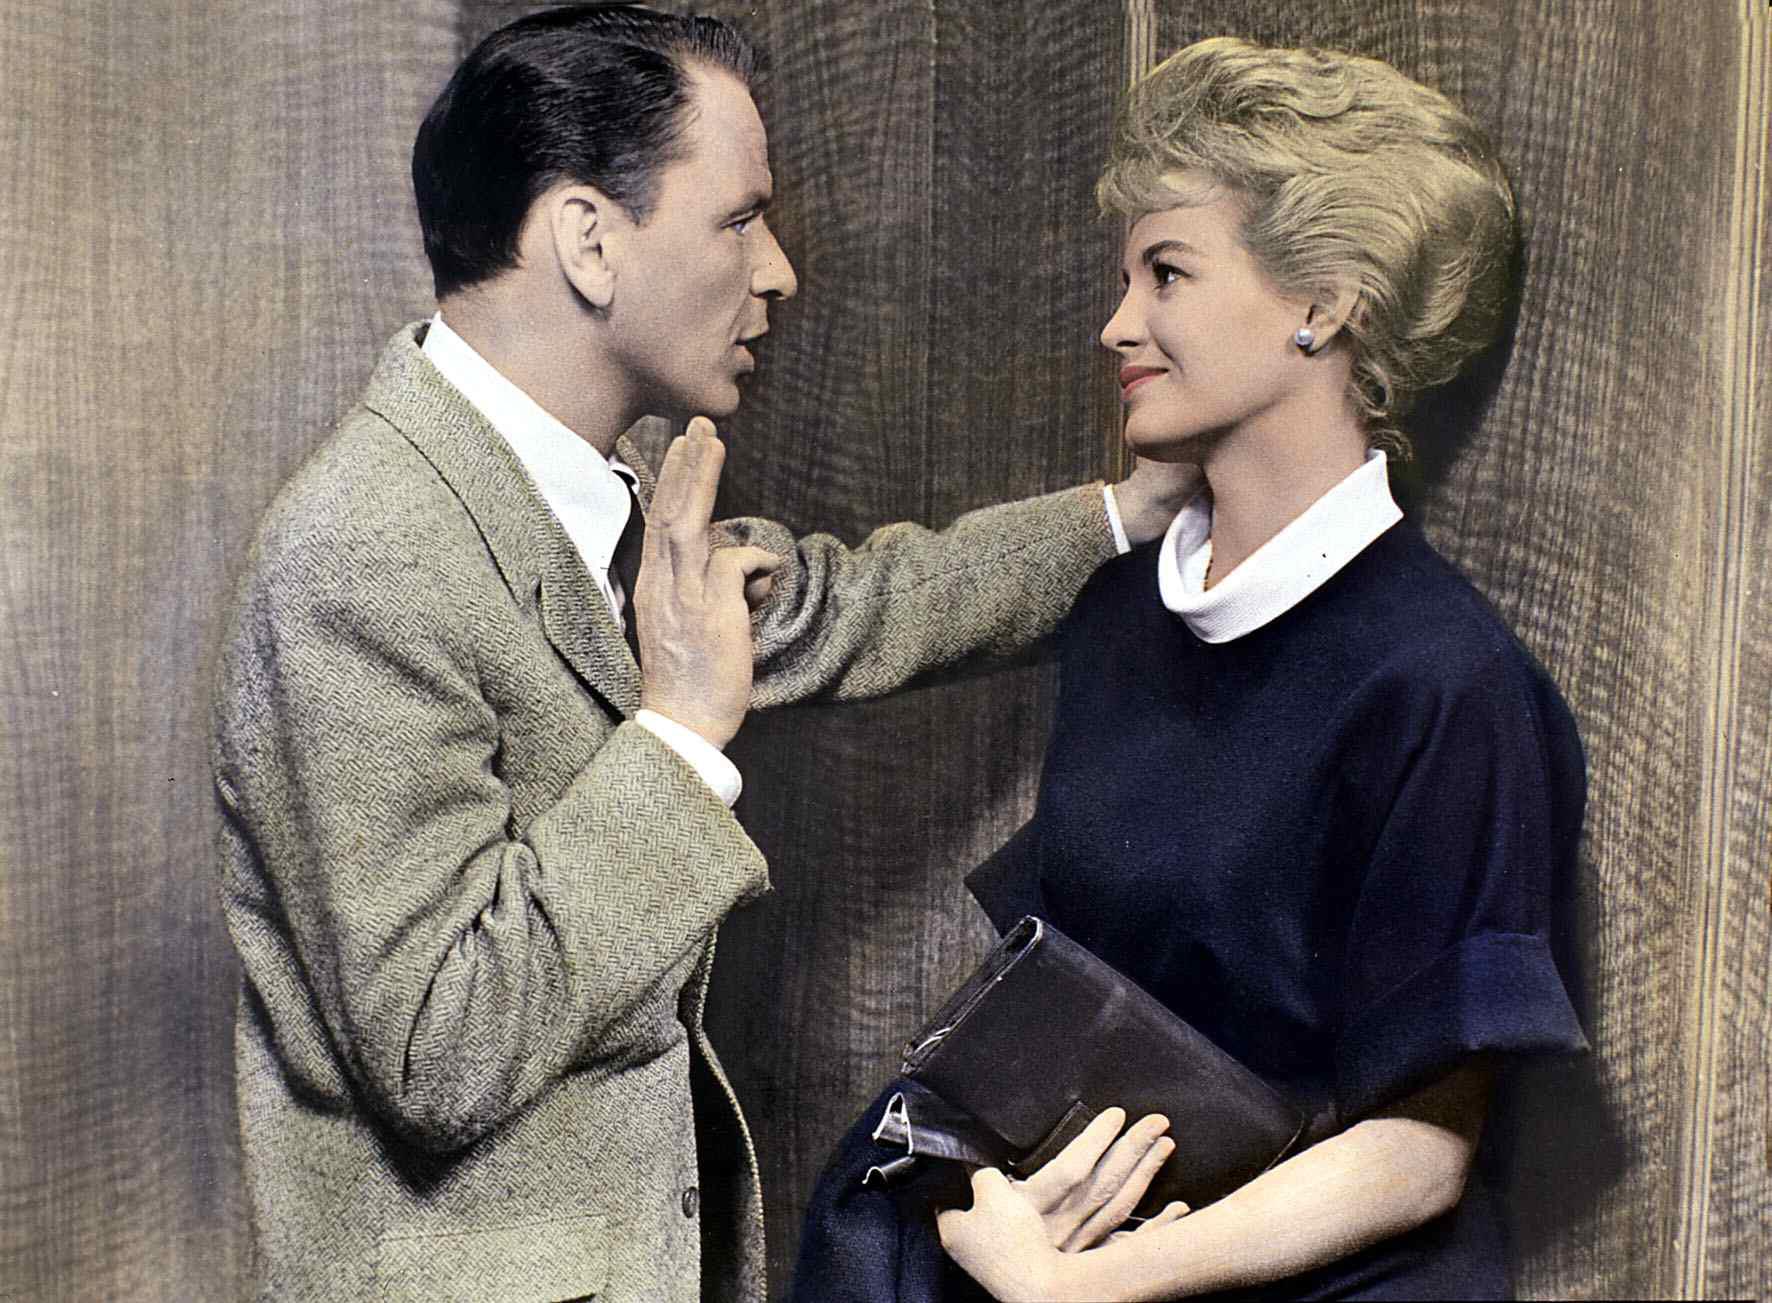 Angie Dickinson Talked About Her Relationship Of 10 Years With Frank Sinatra In Rare Interview